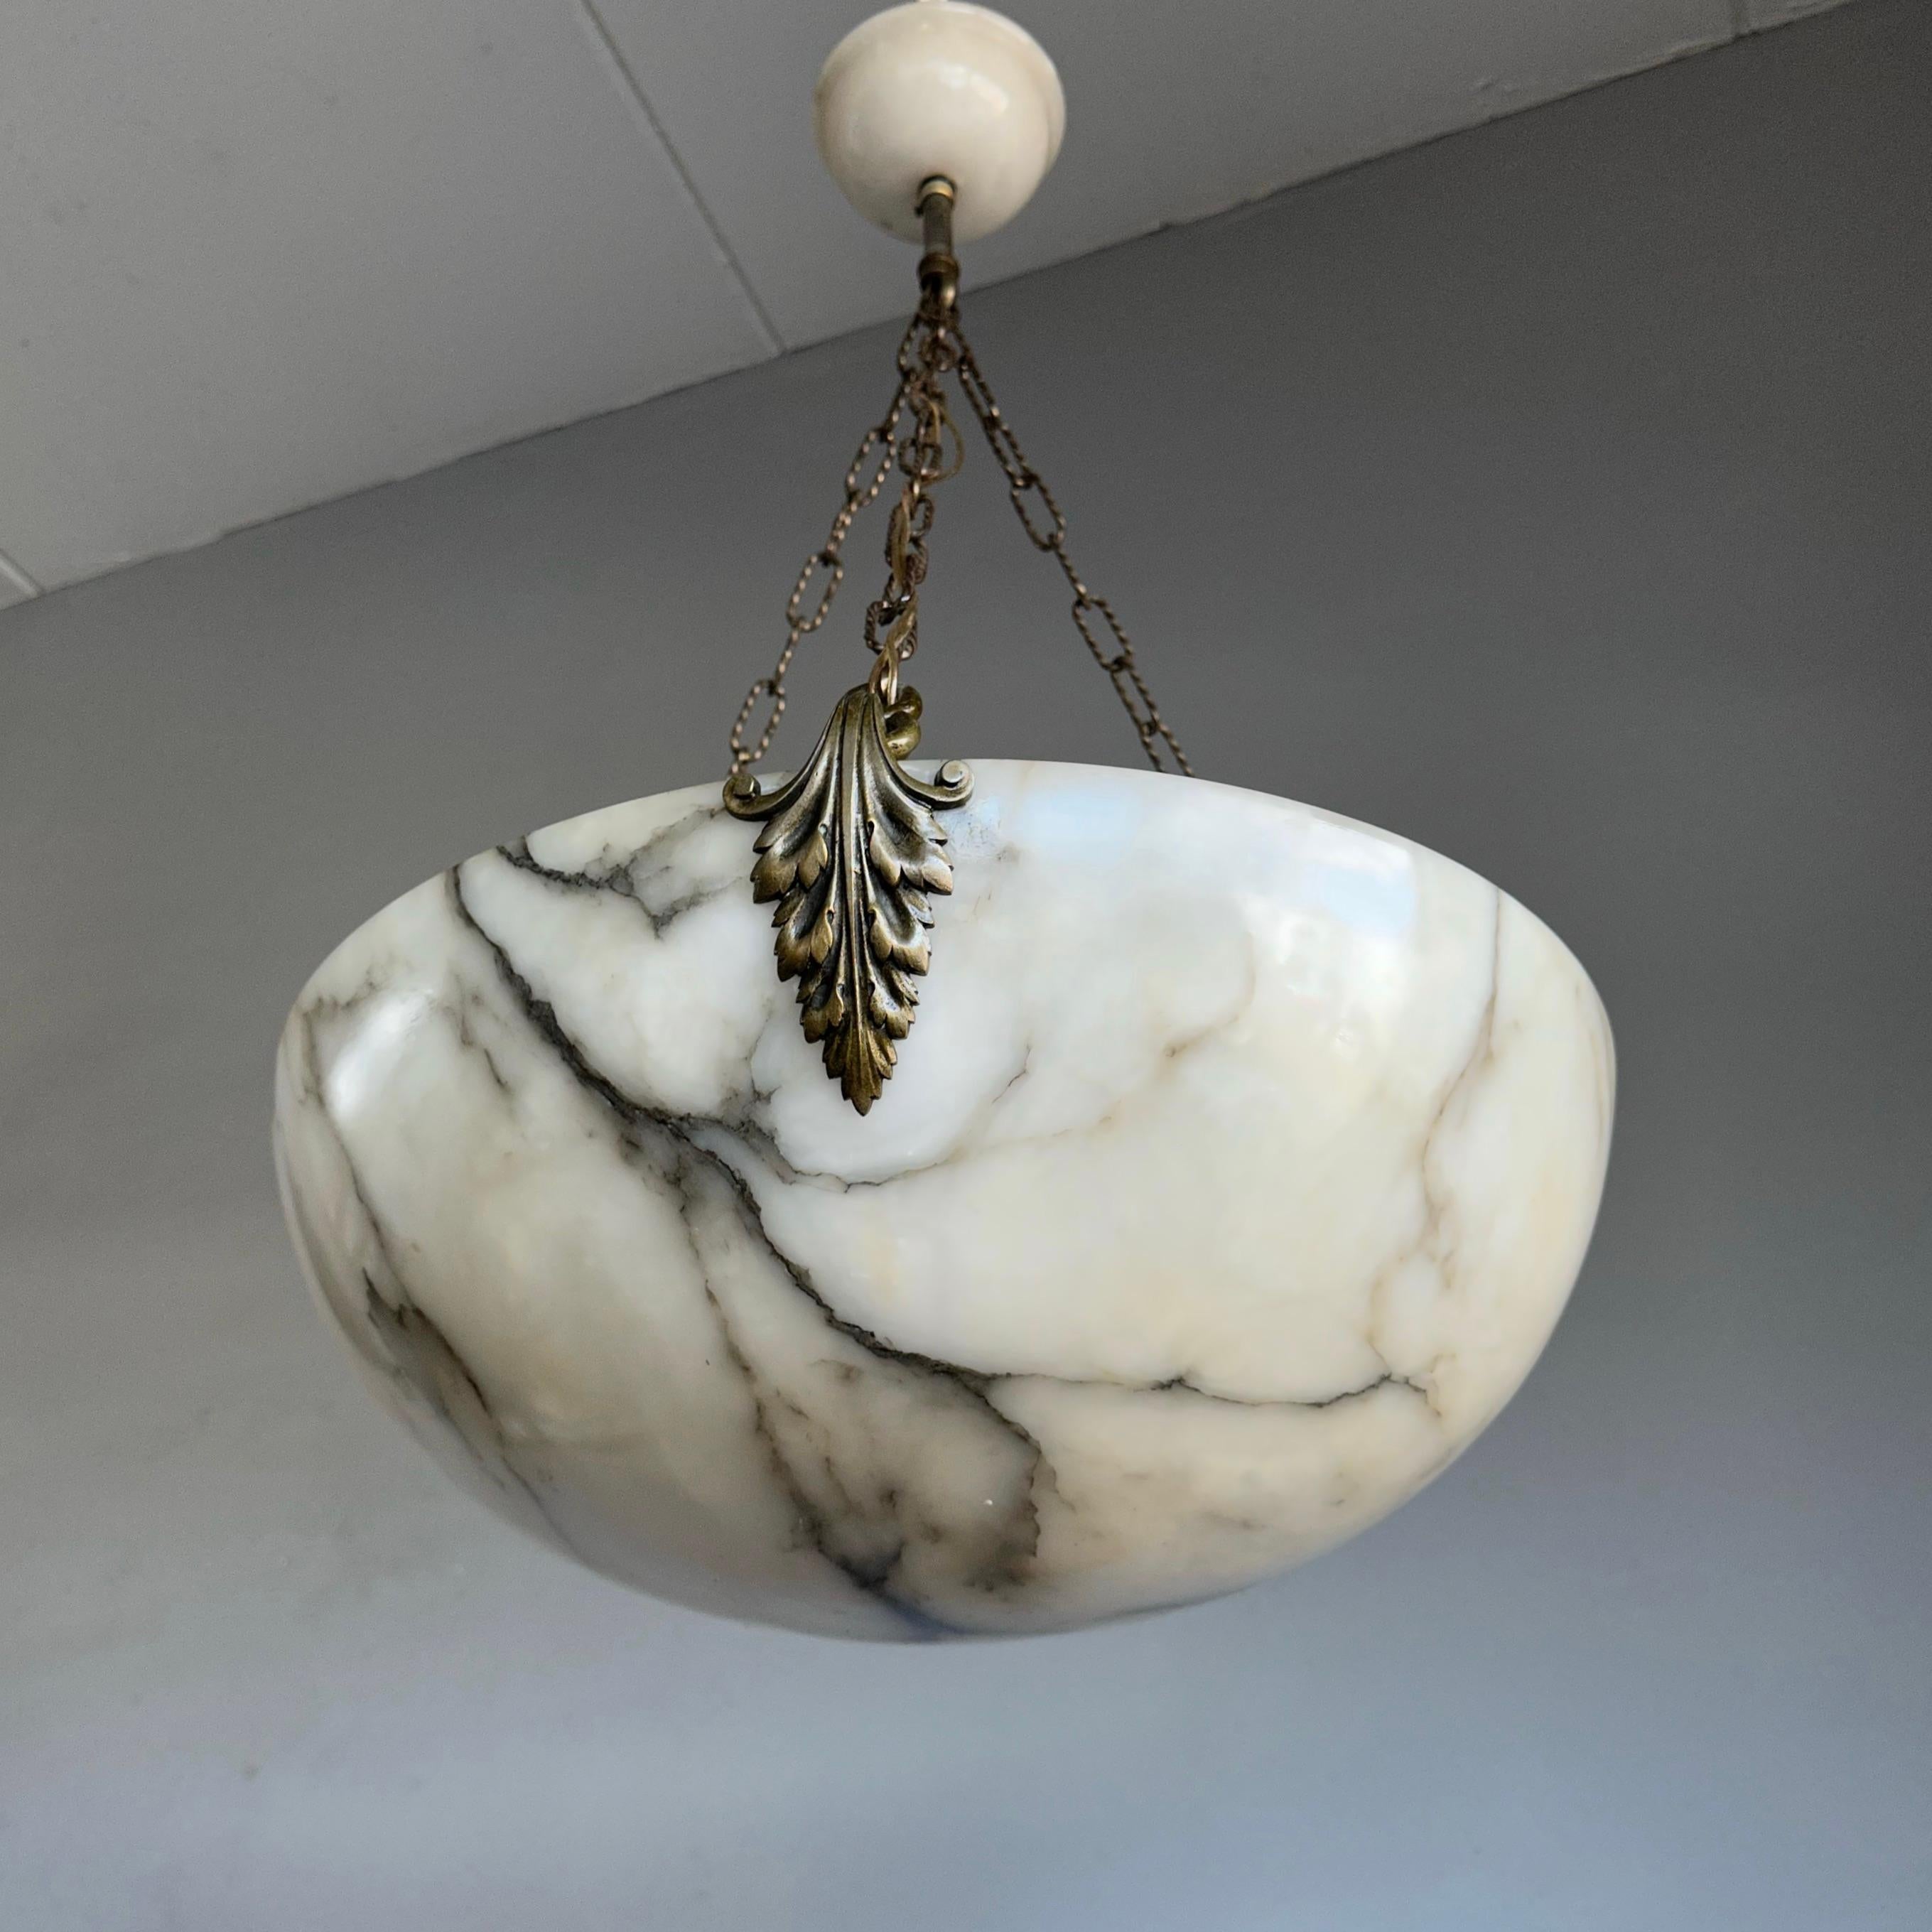 Top class antique chandelier with a large size alabaster mineral stone shade and canopy.

Thanks to its extra large size and great condition this alabaster chandelier will light up your days and evenings in a way that no modern fixture ever could.